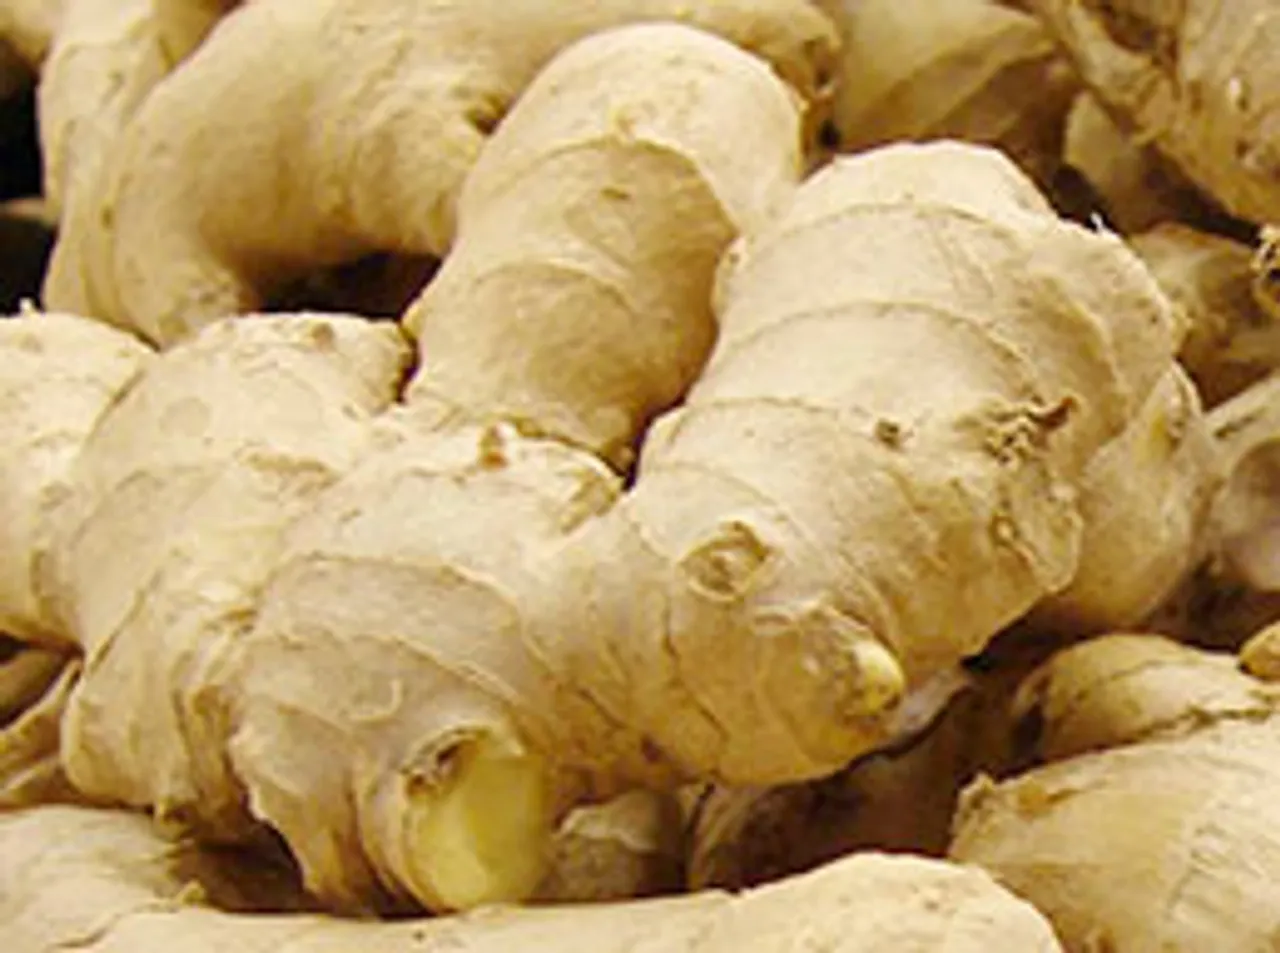 Ginger is not just a root